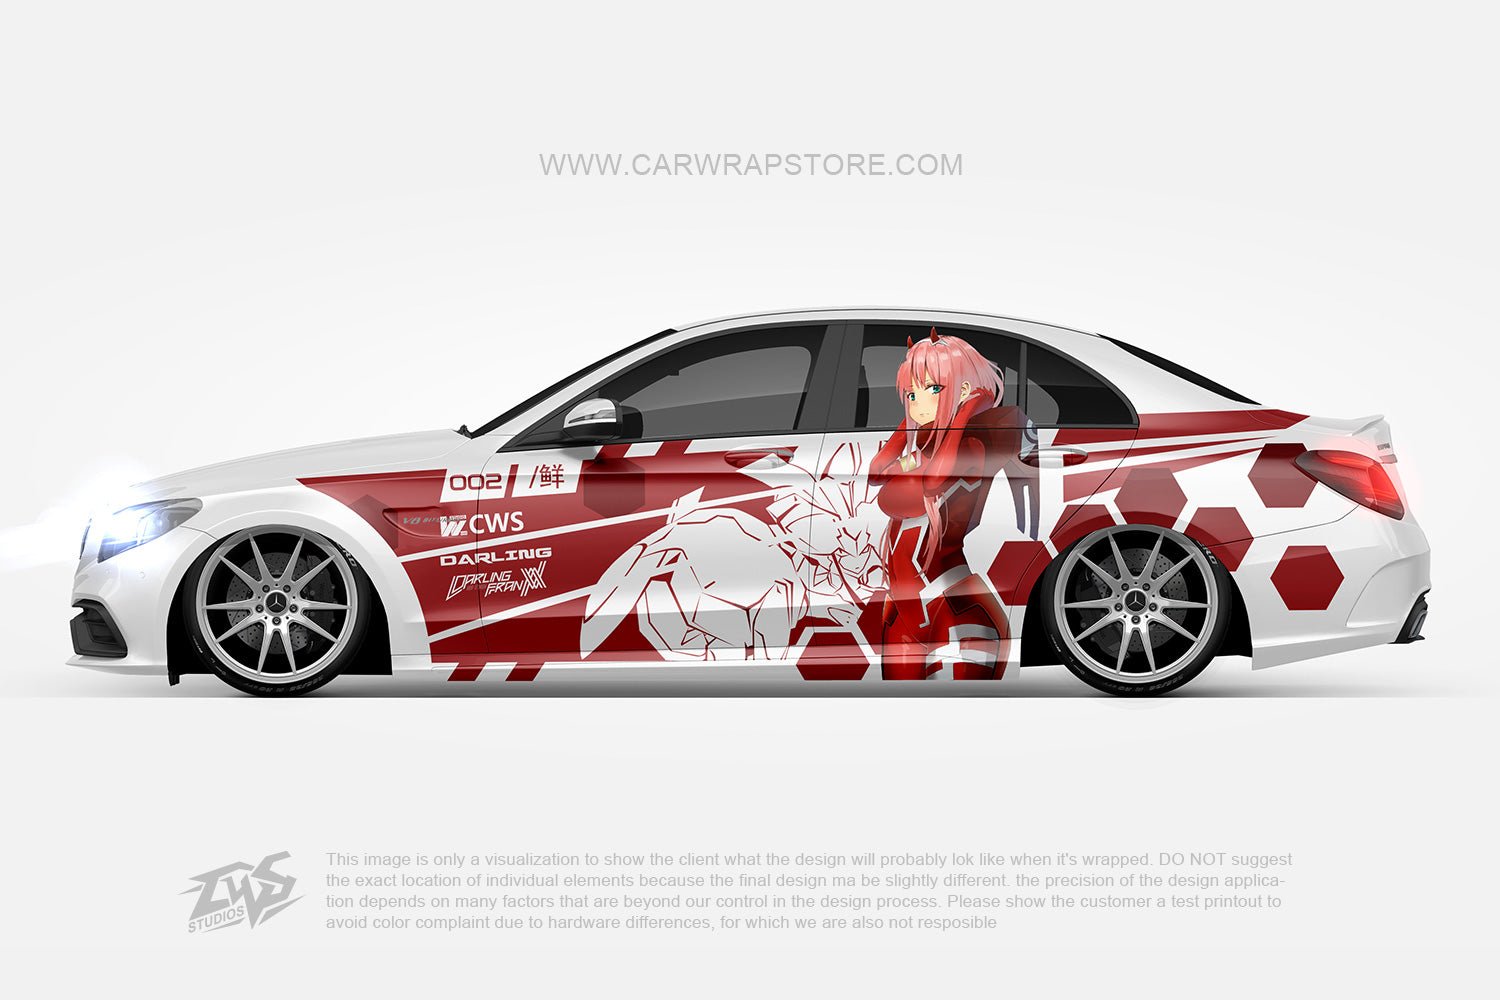 Zero Two DARLING in the FRANXX【002-05】 - Car Wrap Store